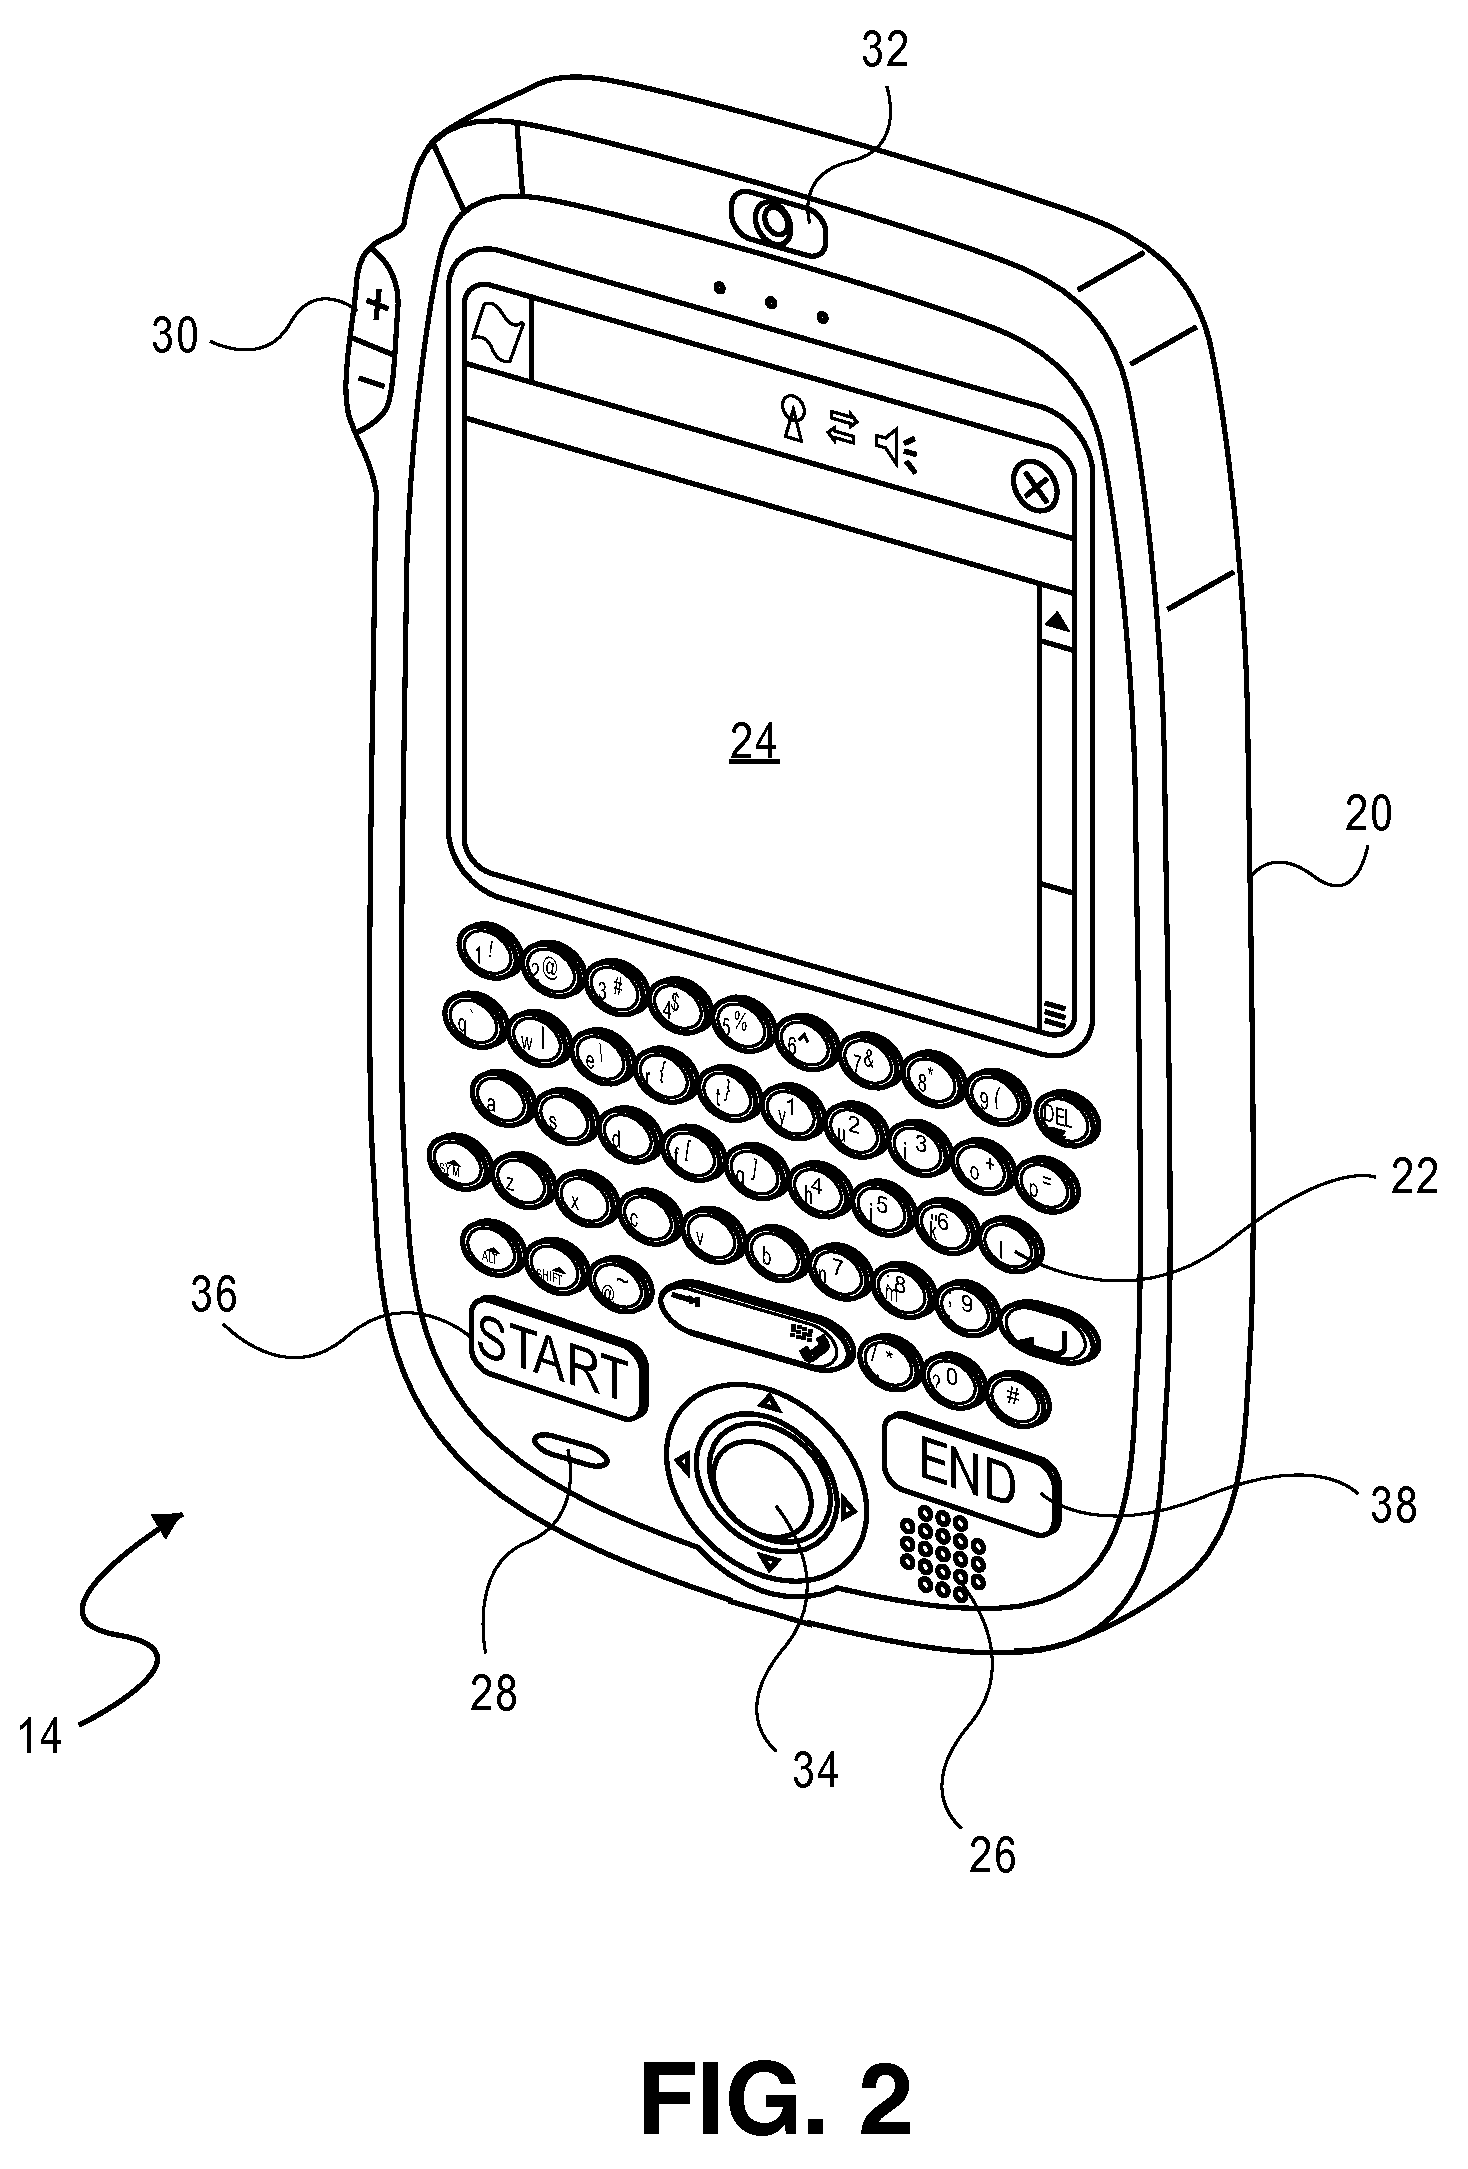 Real-time messaging method and apparatus